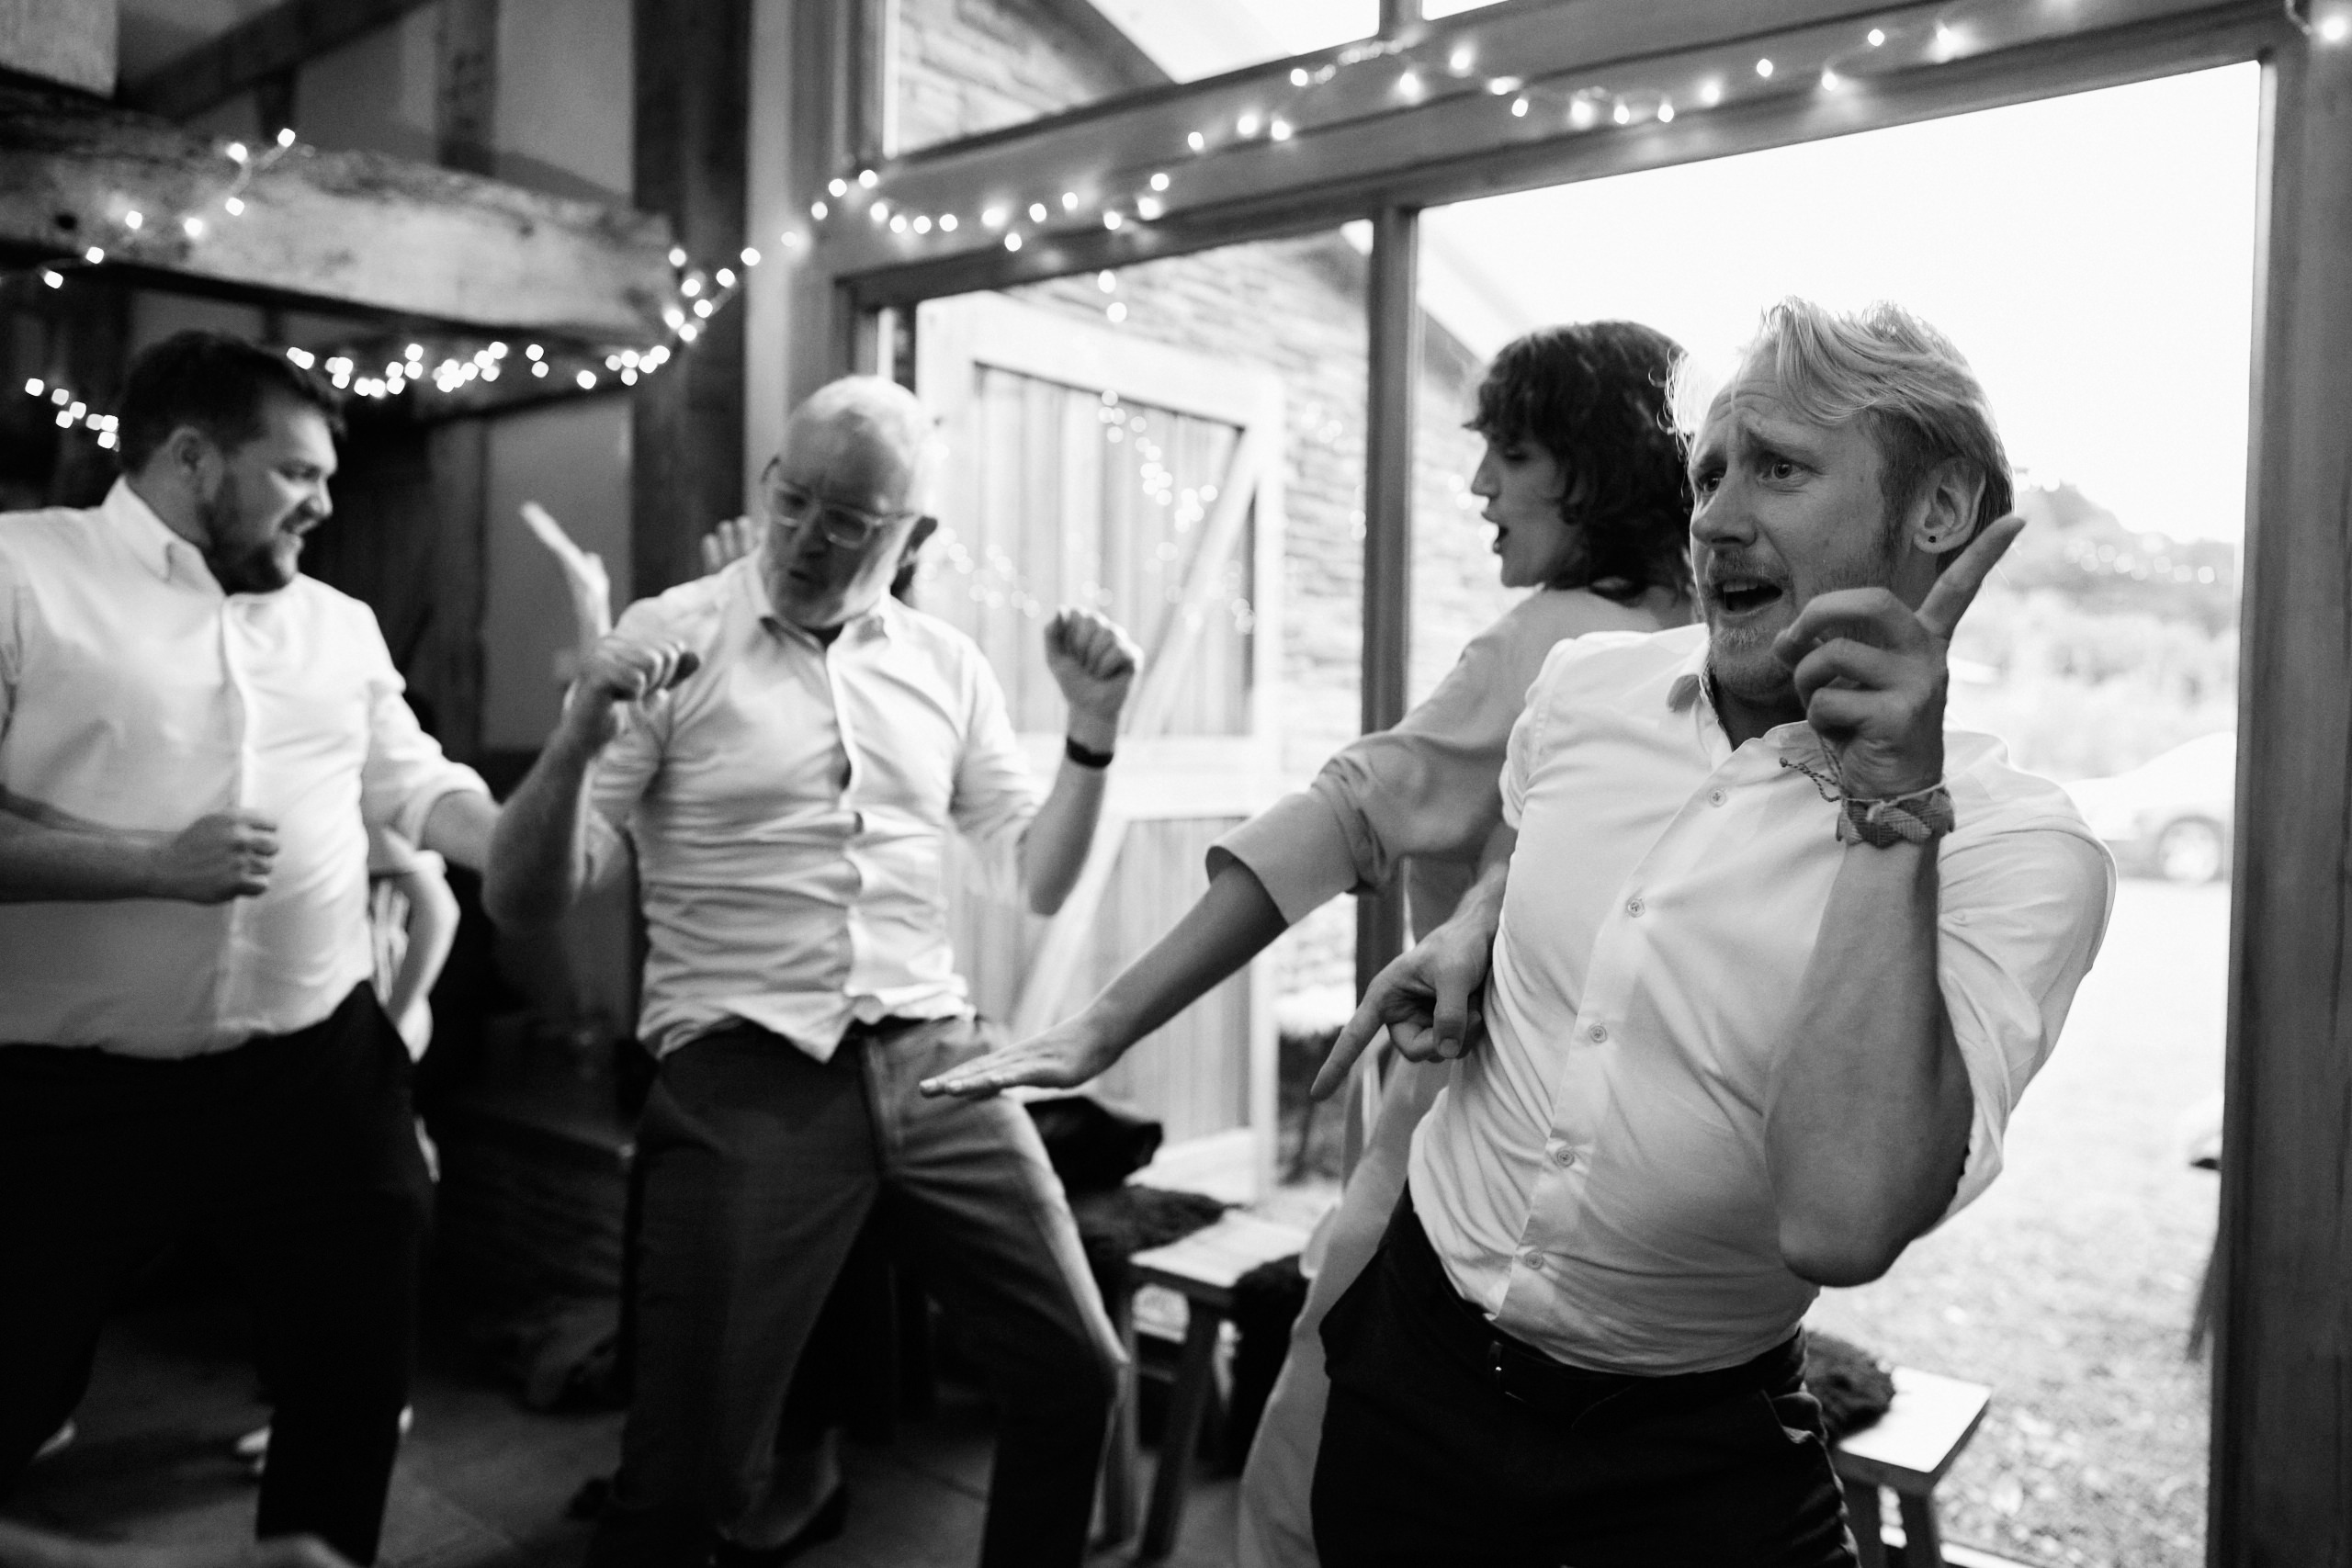 A group of people are dancing in a barn in this black and white picture.